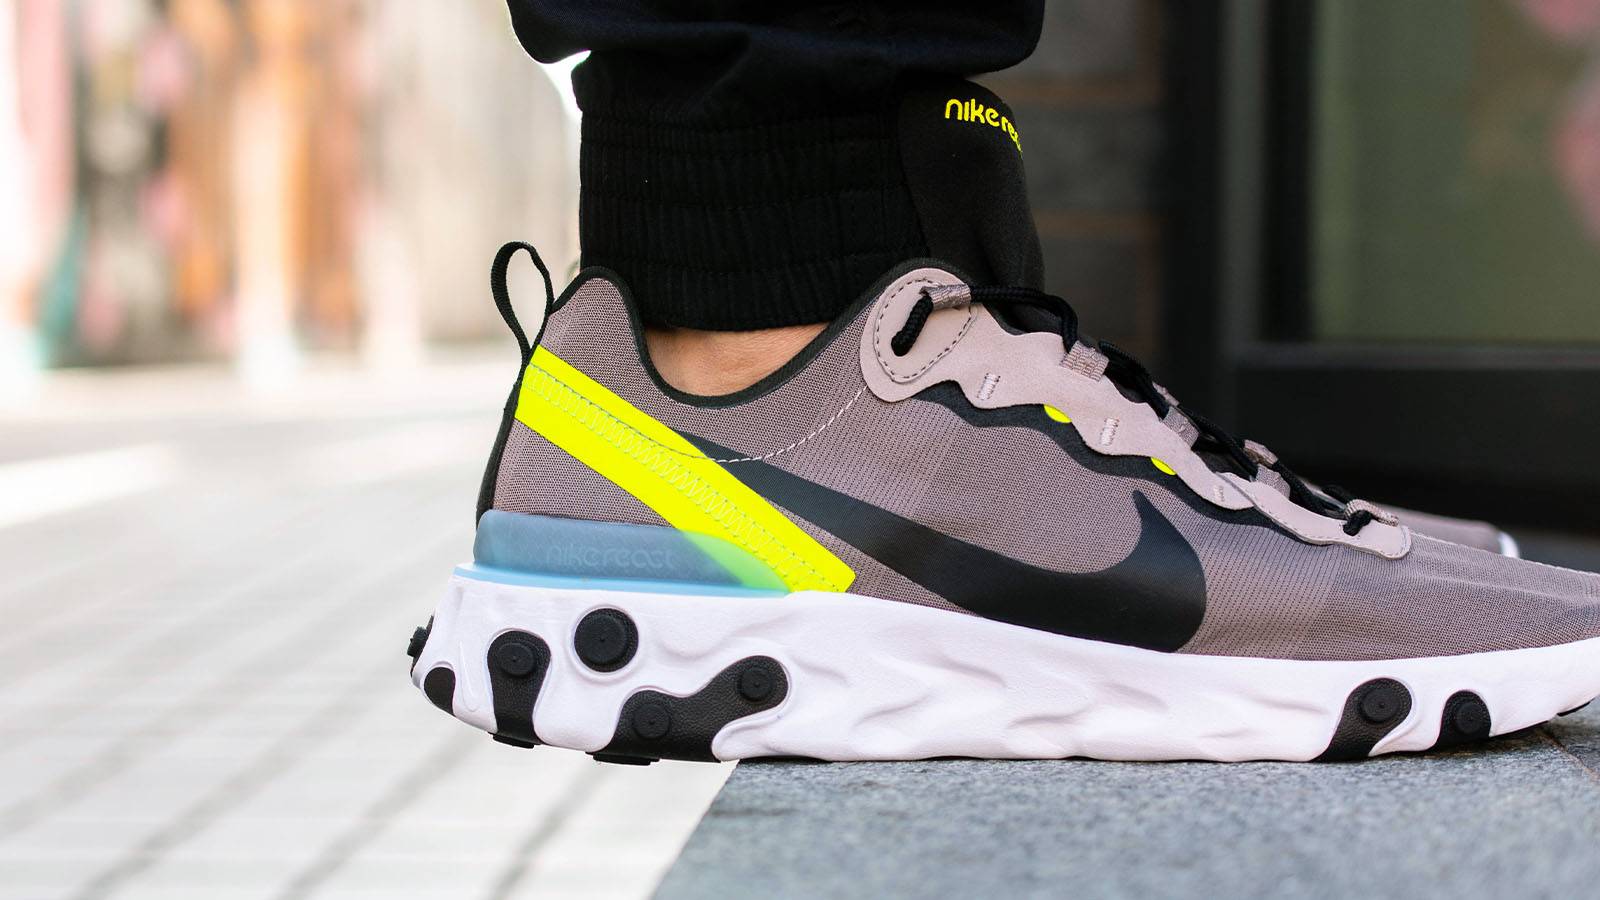 are nike react element 55 good for running